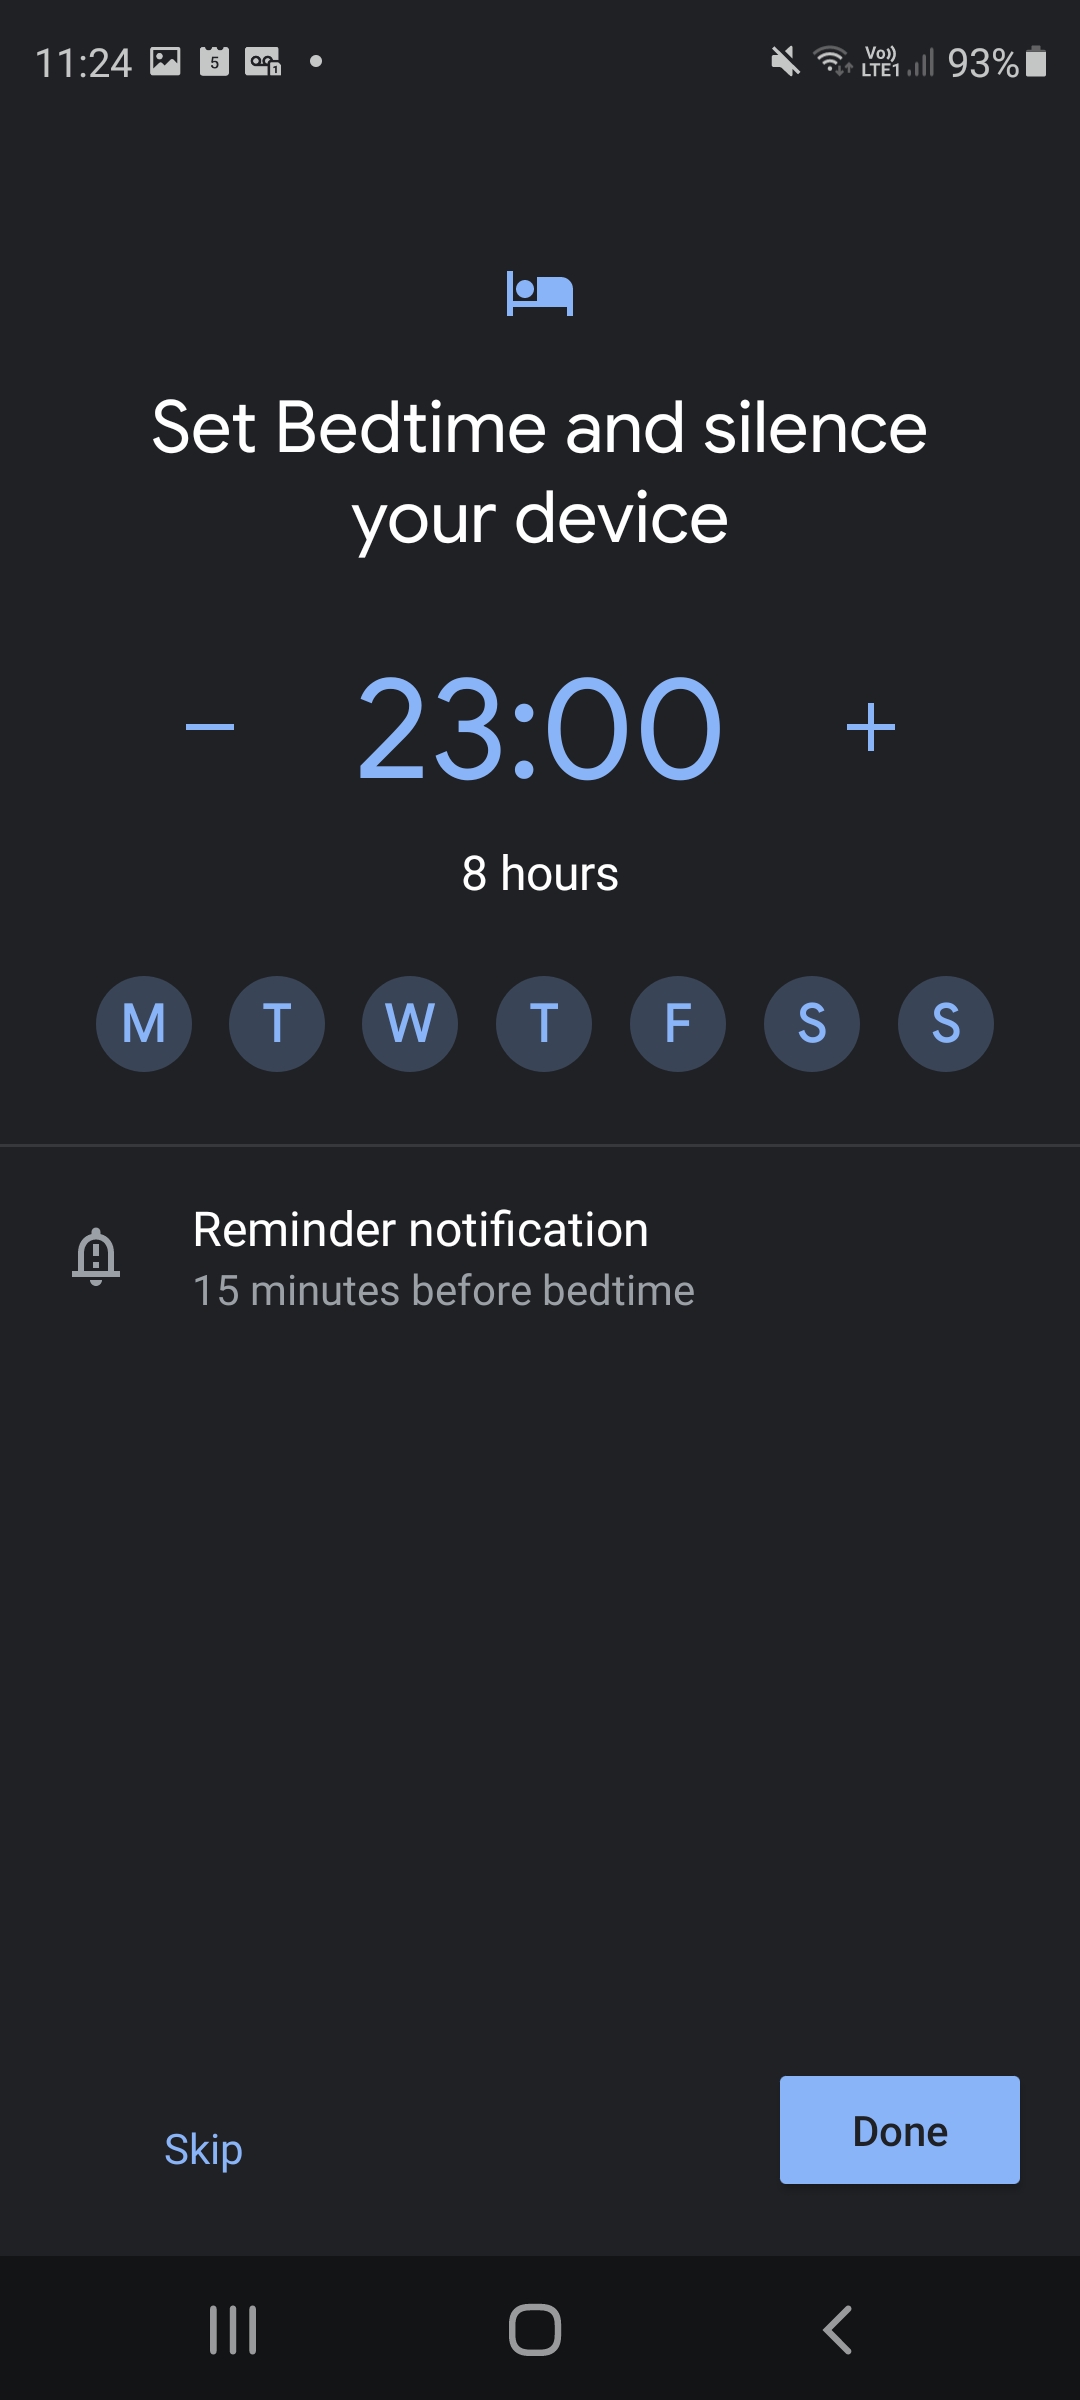 underskud Emigrere skille sig ud The Best Alarm Clock Apps for Android and iOS | Digital Trends